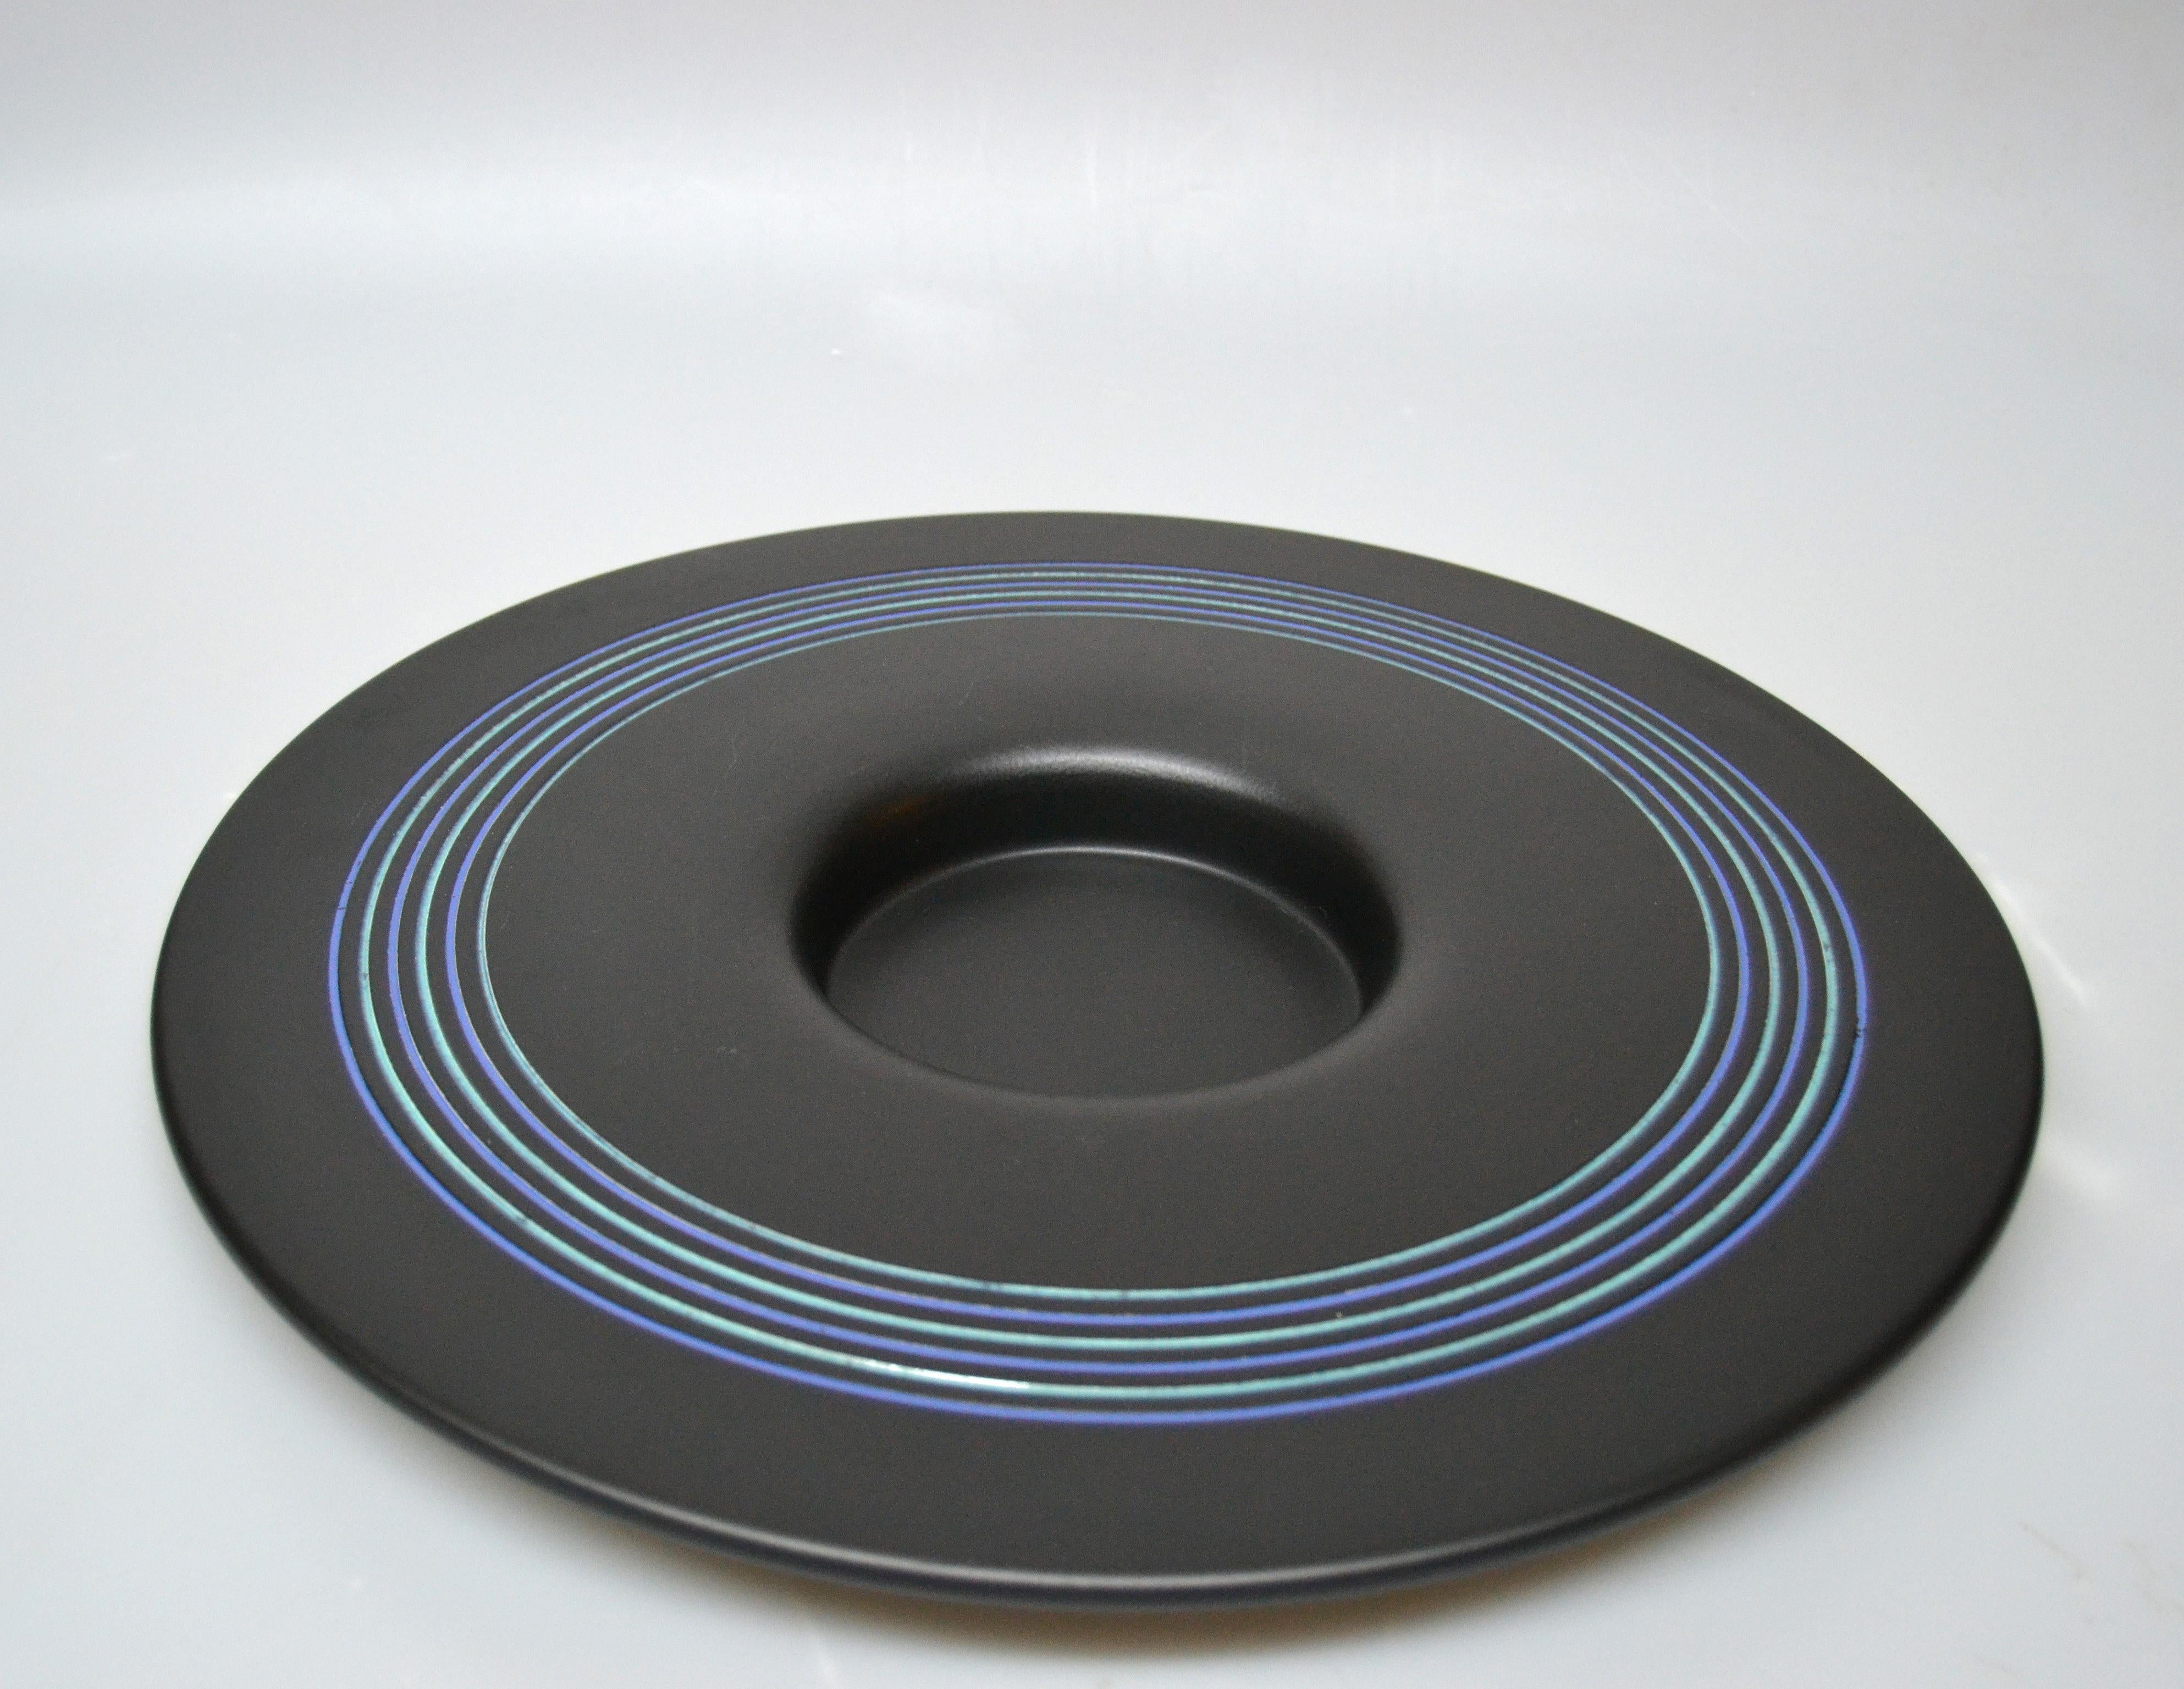 Decorative glazed centerpiece, plate, fruit bowl in black with hues of blue designed by Boccato, Gigante, Zambusi, Architetti for Sicart, Italy.
Original label underneath, numbered 31, Italy.
Wonderfully crafted.